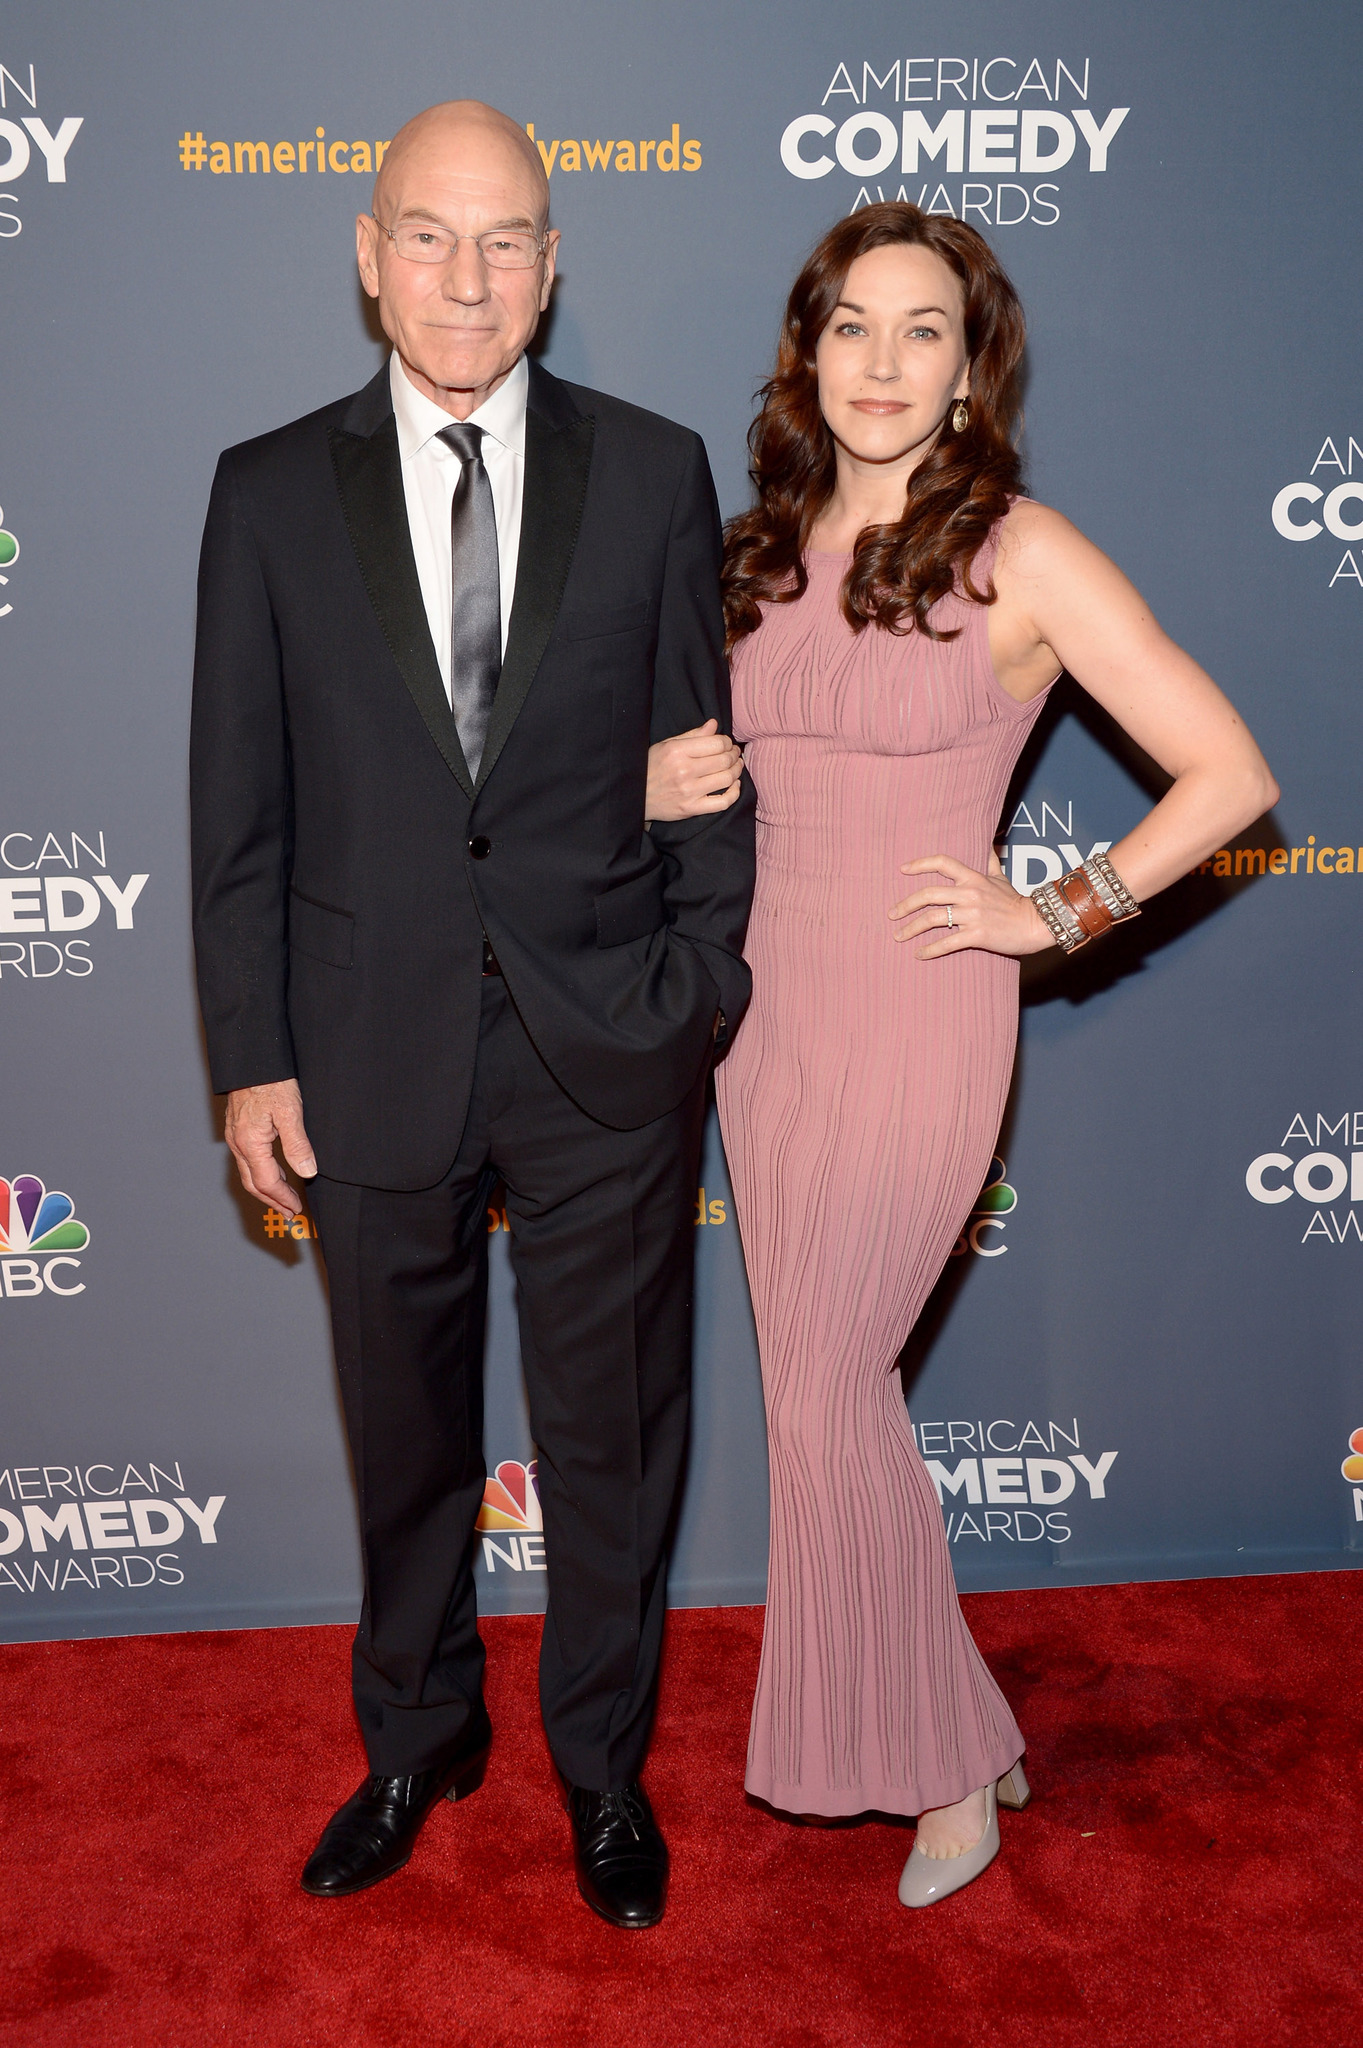 Patrick Stewart (L) and Sunny Ozell attend 2014 American Comedy Awards at Hammerstein Ballroom on April 26, 2014 in New York City.